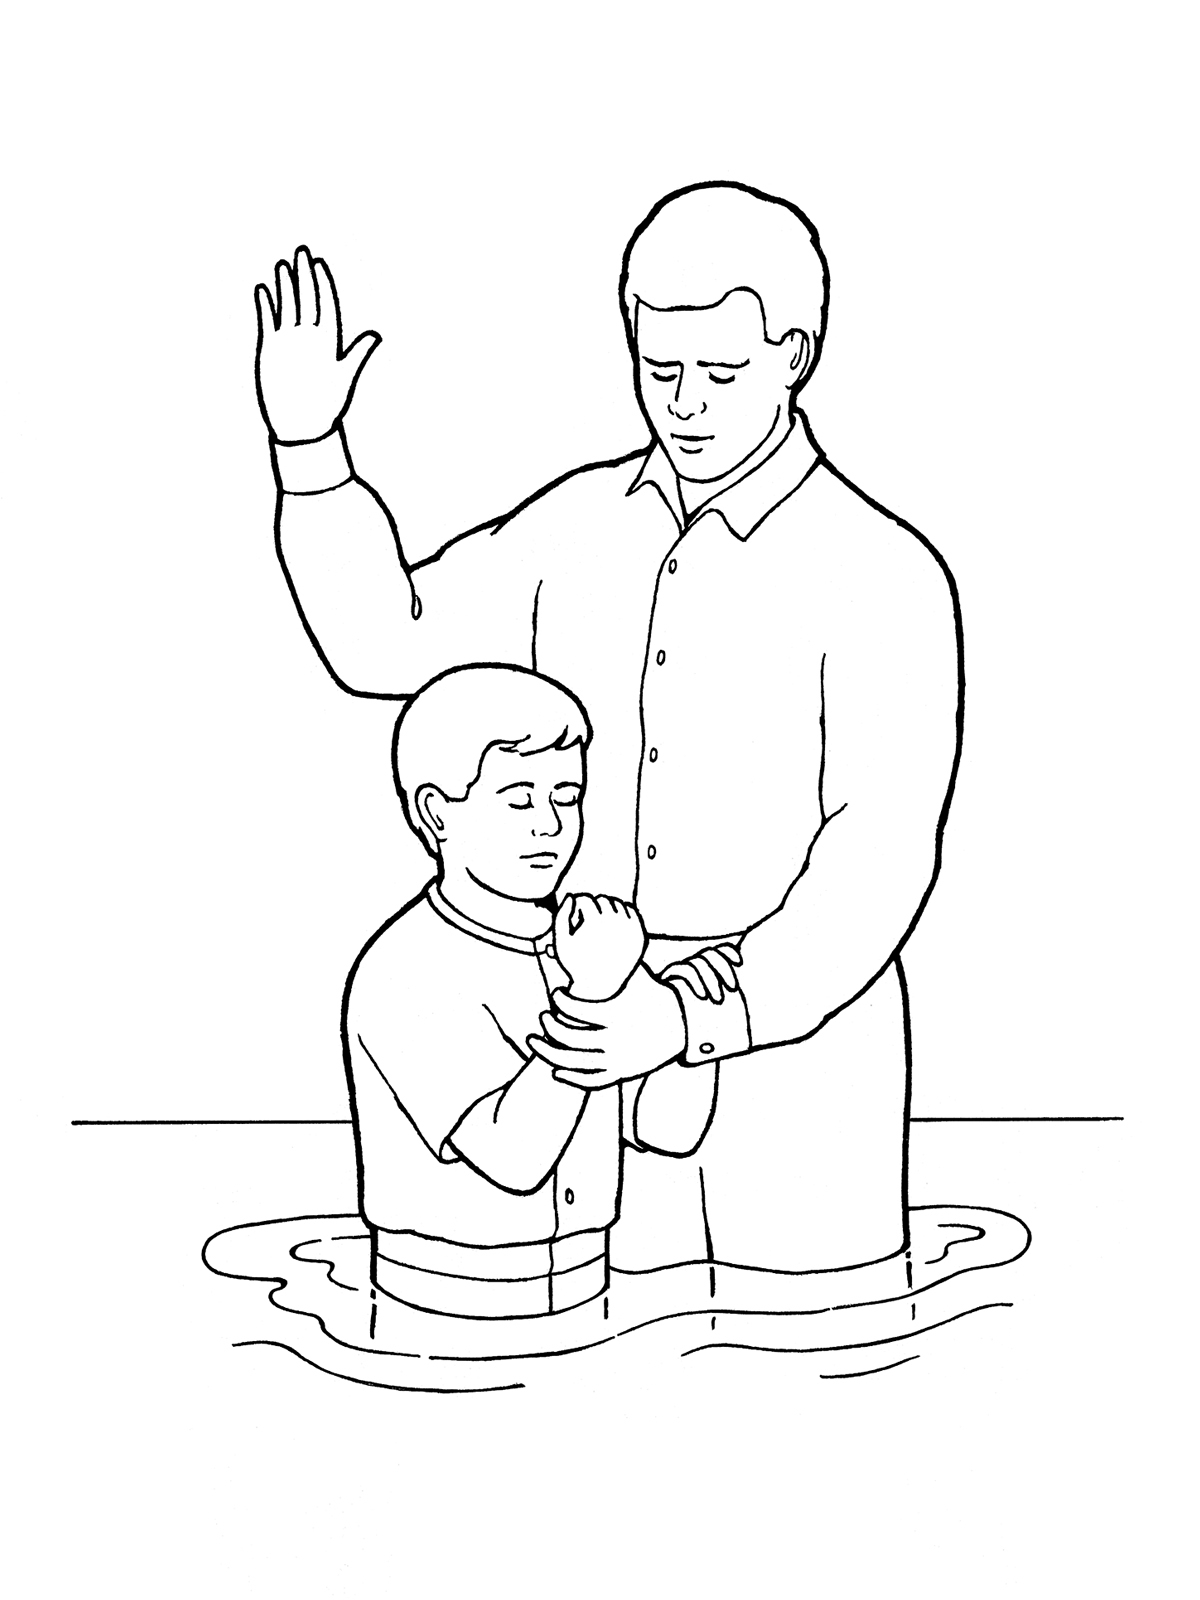 Baptism Coloring Pages Printables At GetColorings Free Printable Colorings Pages To Print